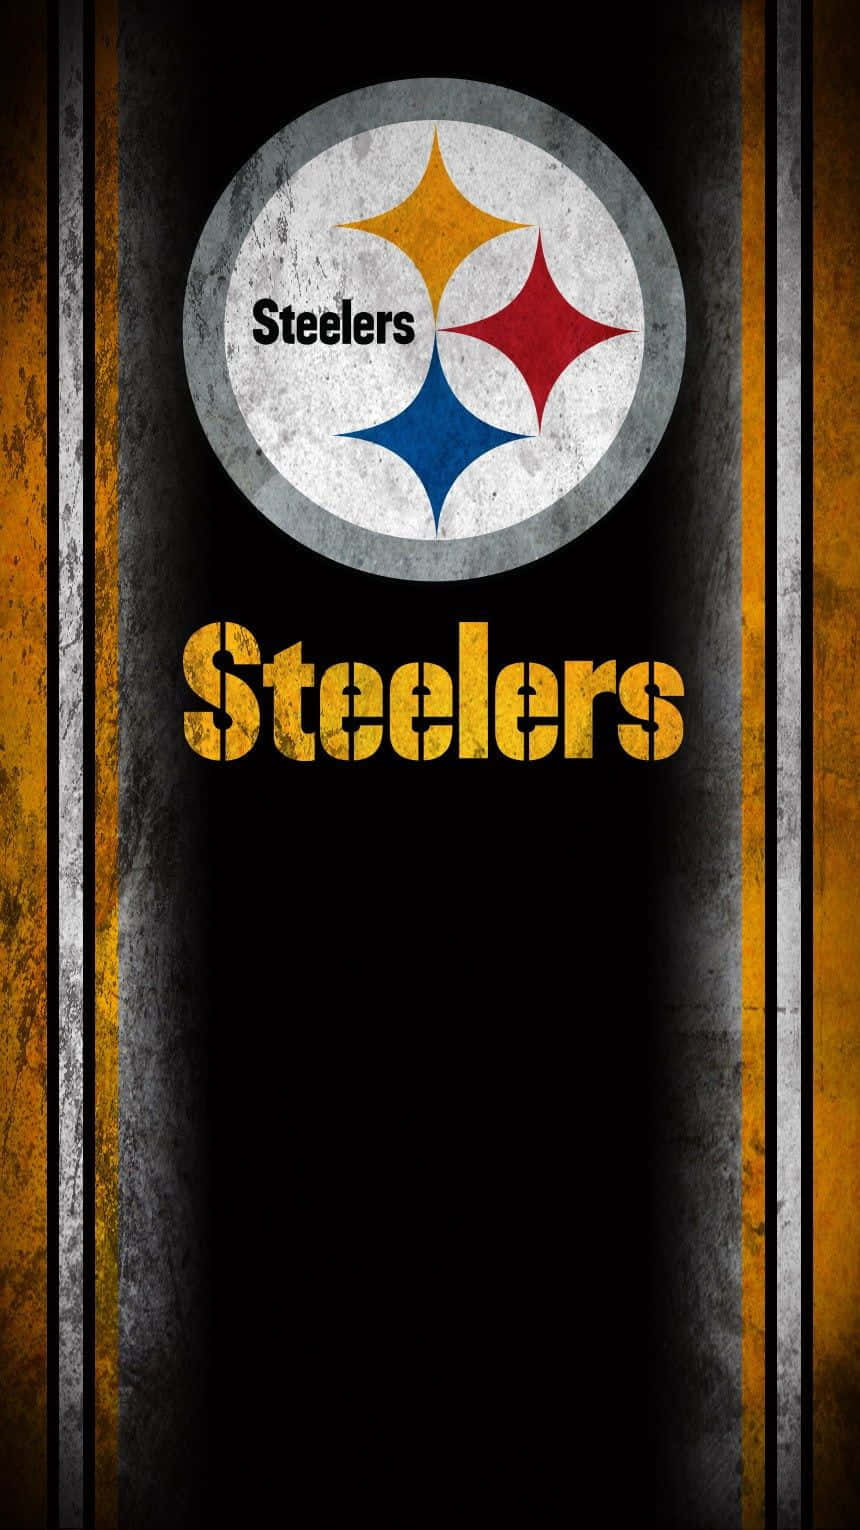 Show Your Steelers Pride On Your Phone! Background